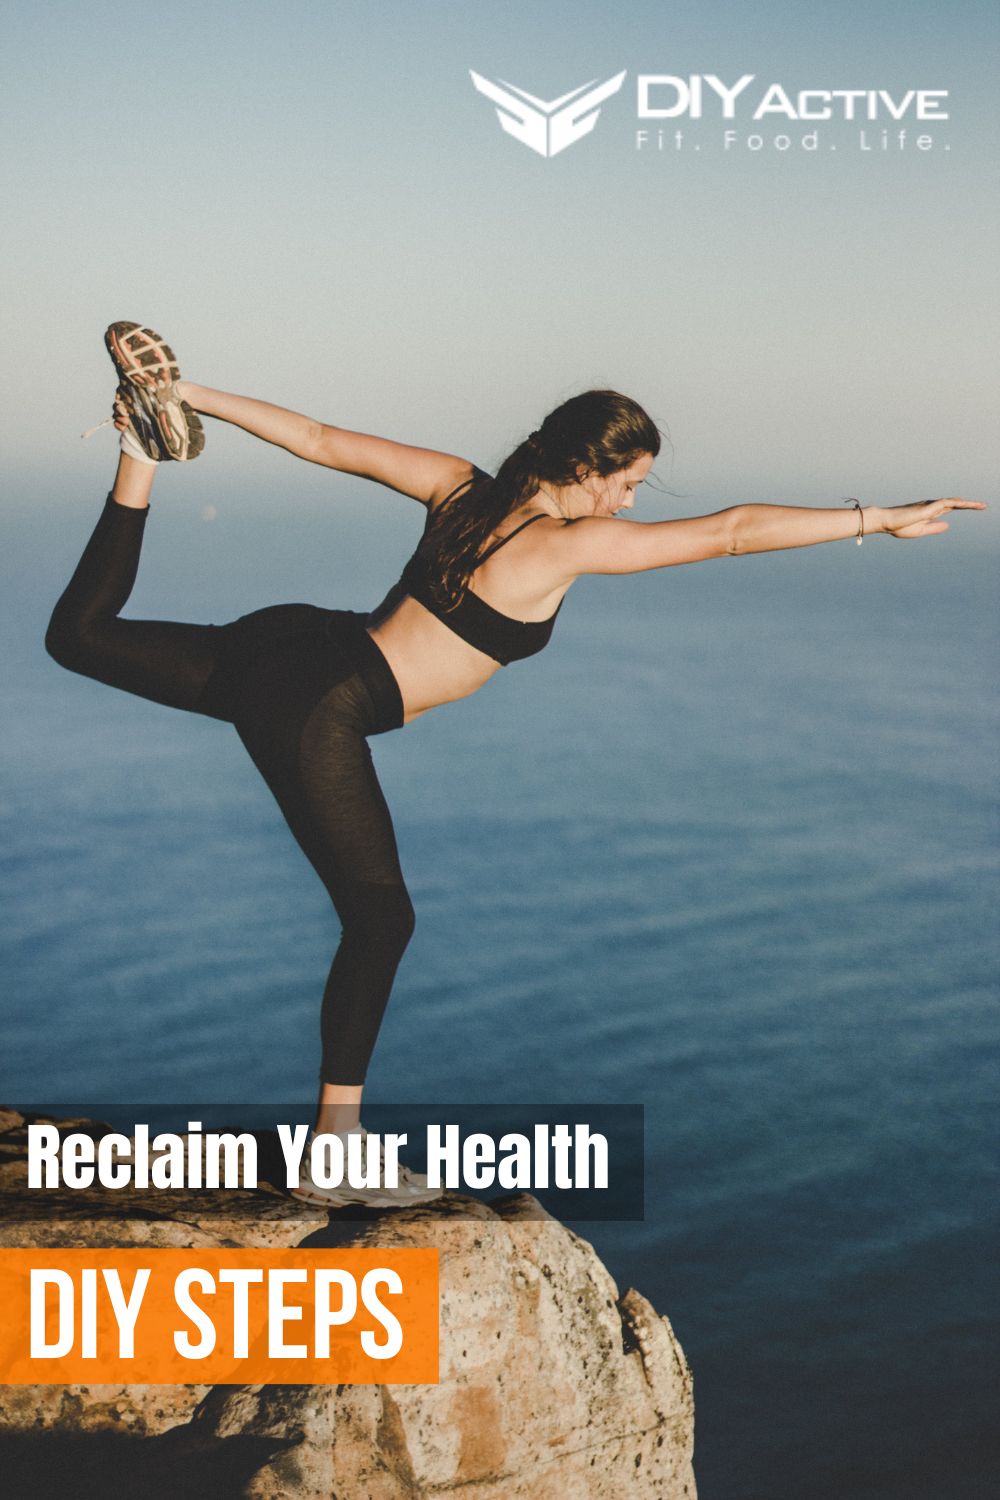 Revive Your Well-being 6 DIY Steps to Reclaim Your Health Today 2